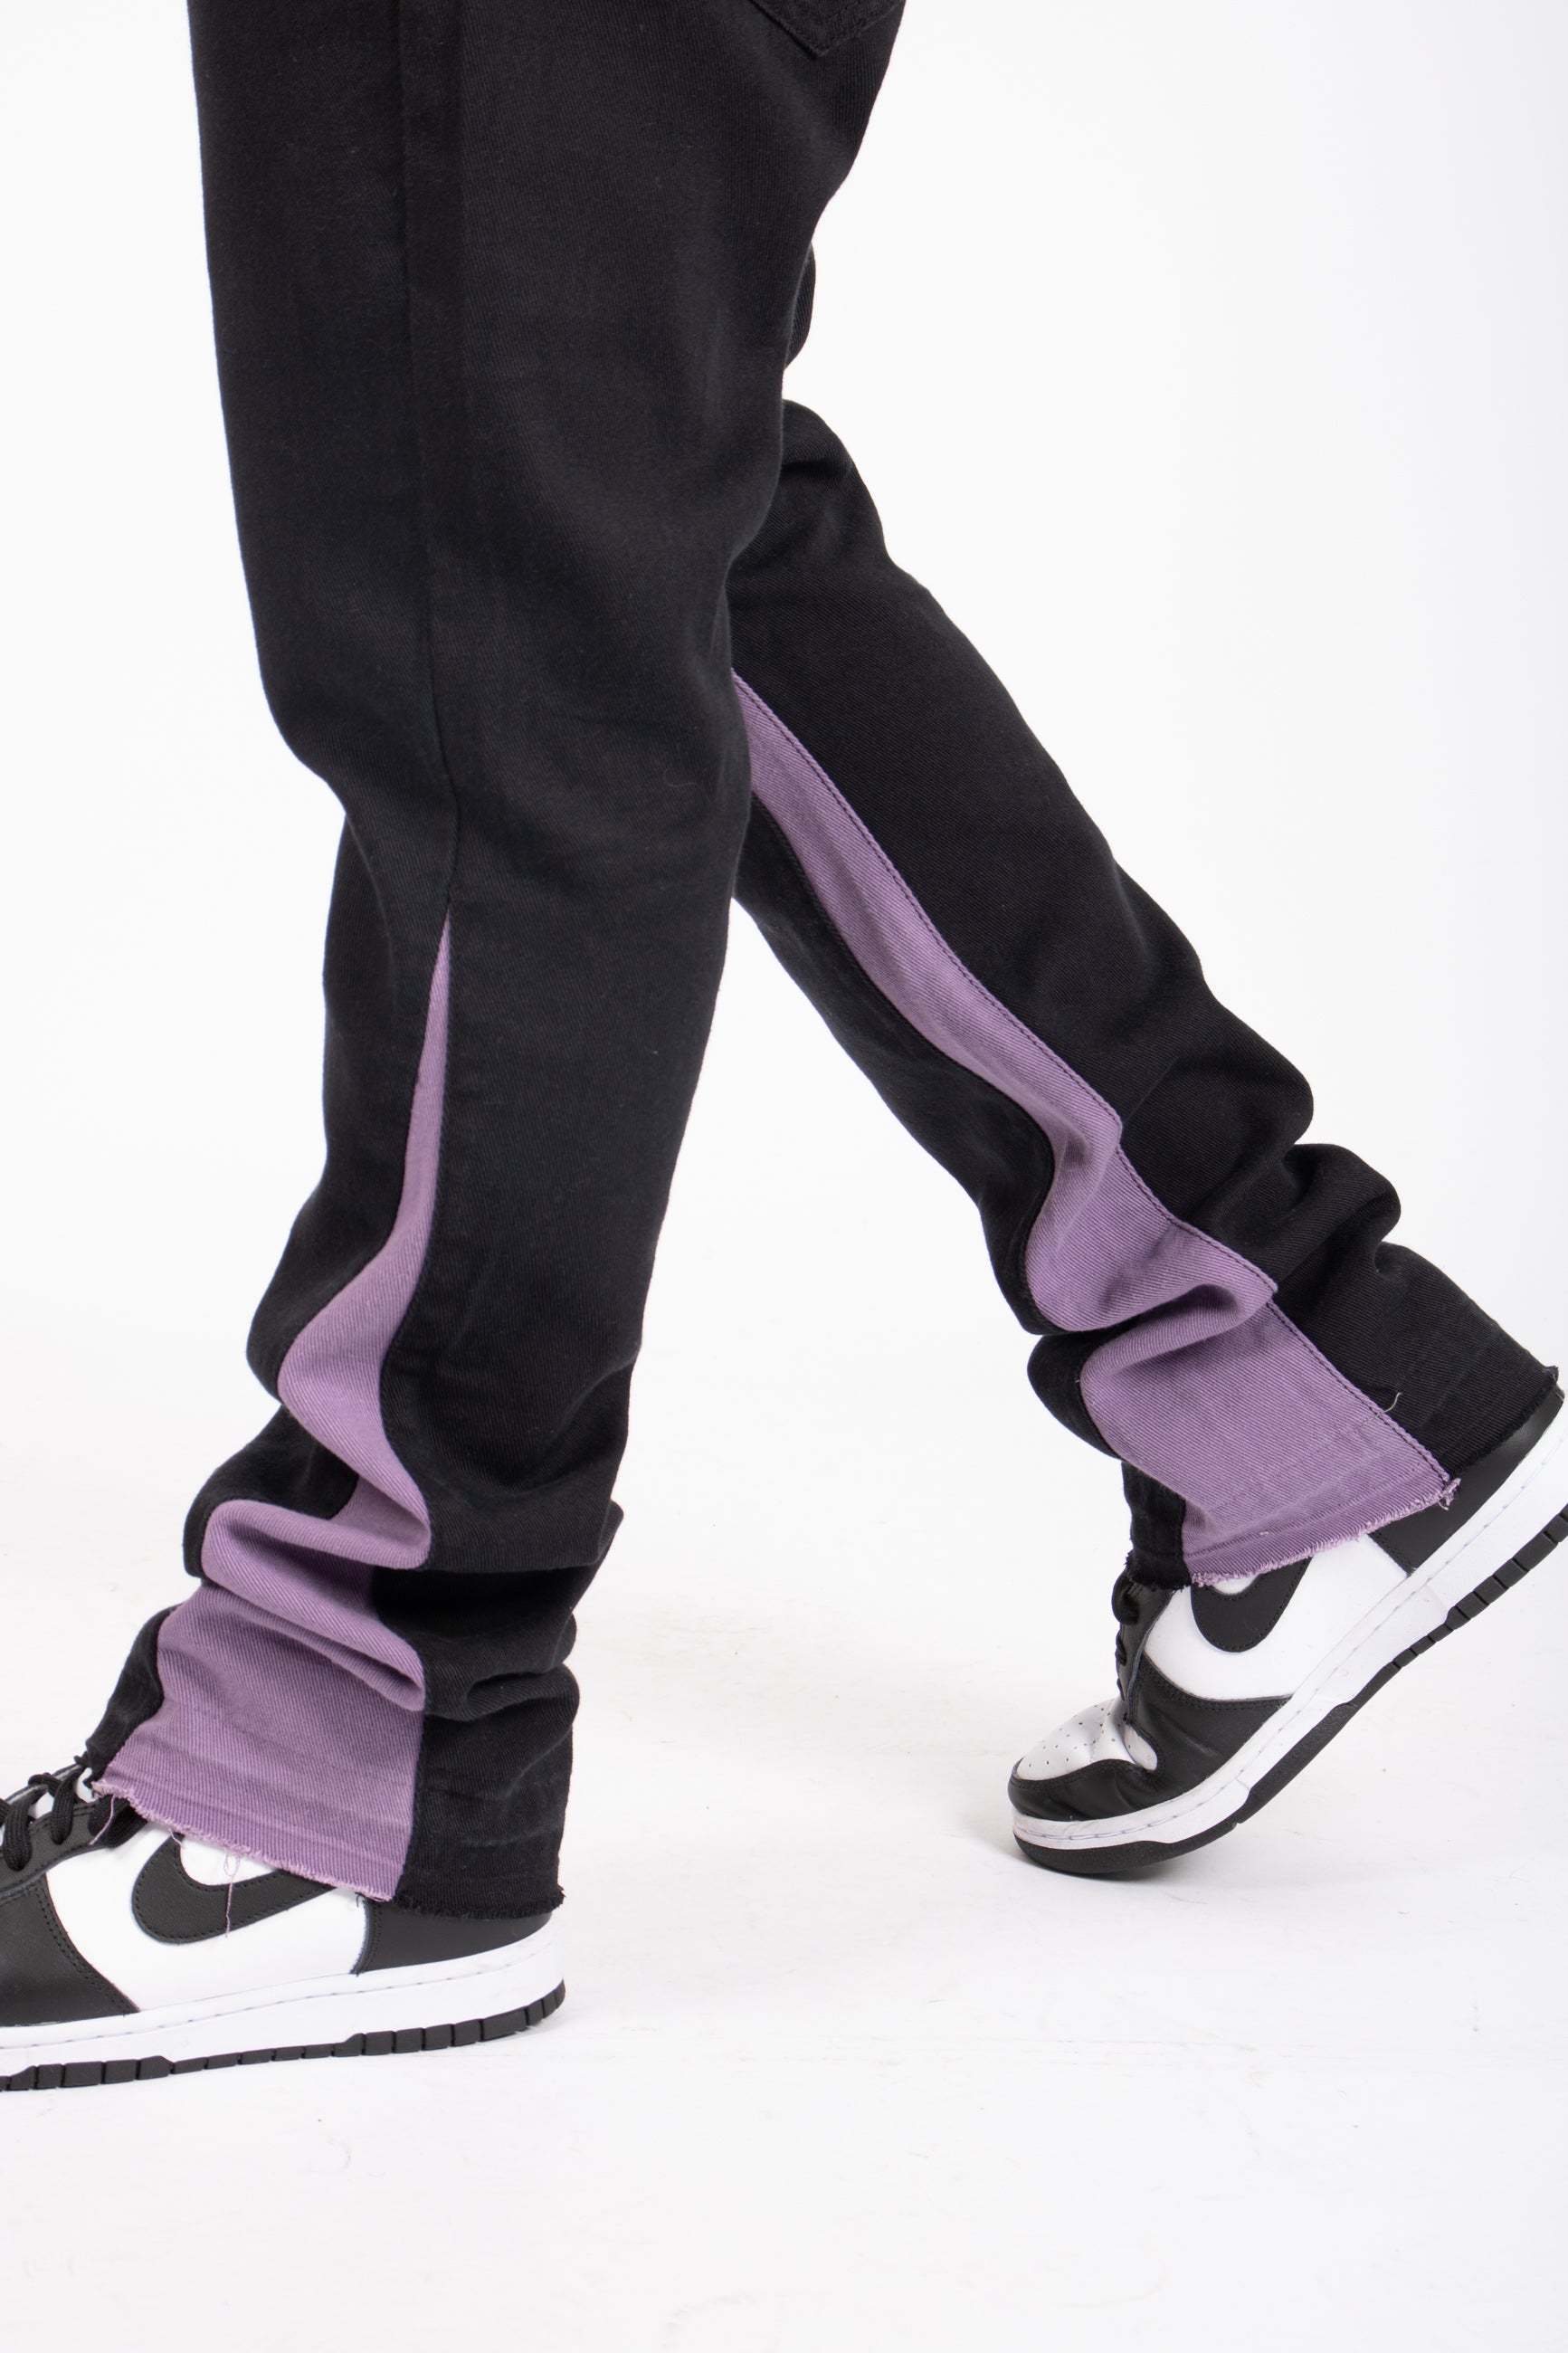 Straight Leg Spliced Jean in Black and Lilac